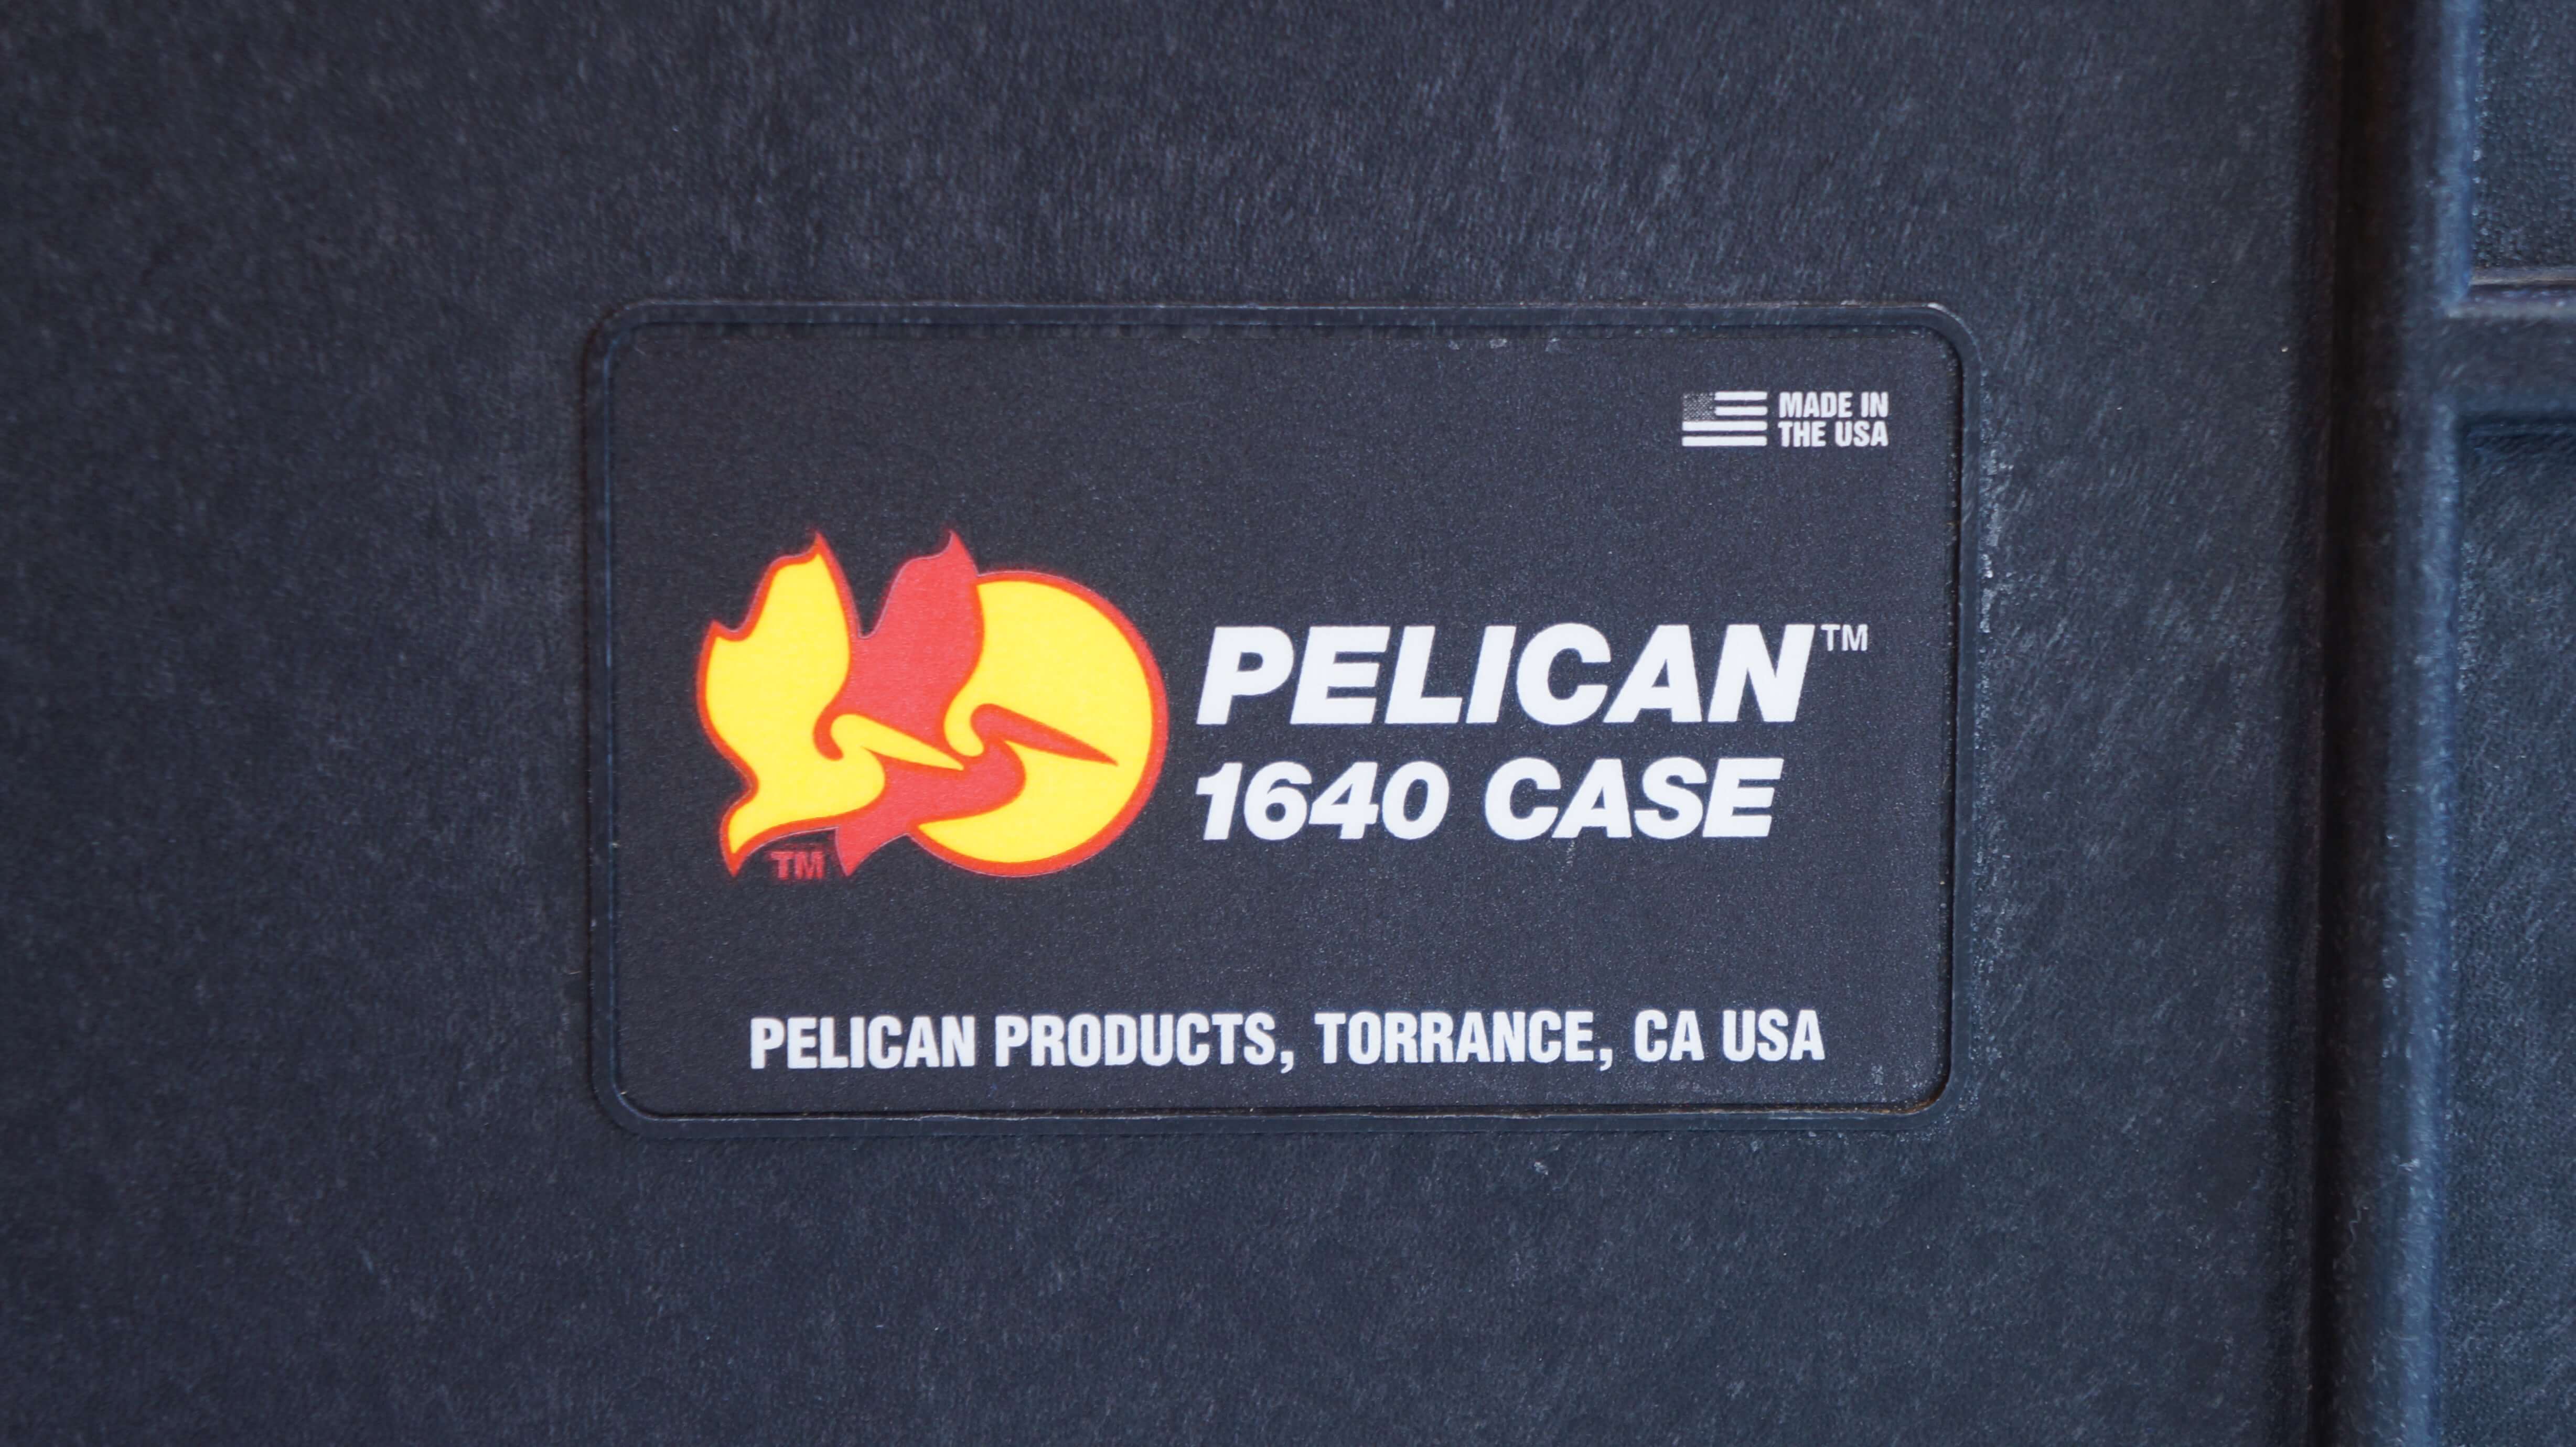 PELICAN TRANSPORT CASE 1640 made in USA / ペリカン トラスポート ケース 1640 アメリカ製